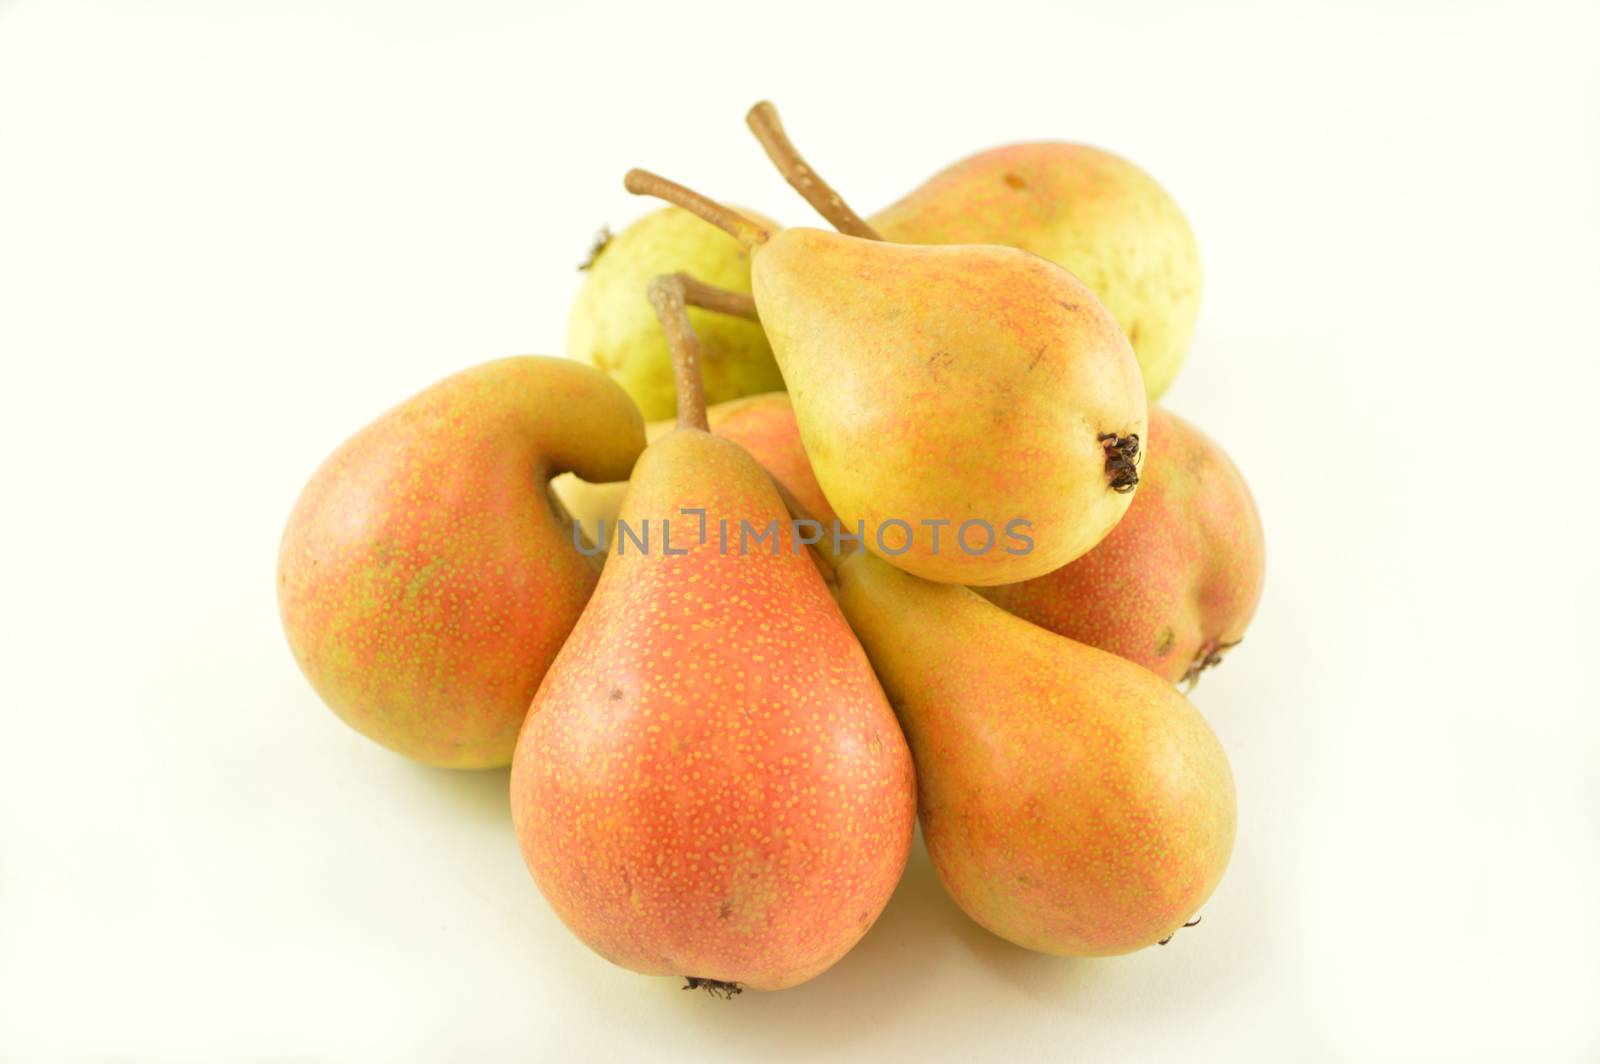 Pears in a bowl isolated on a white background.